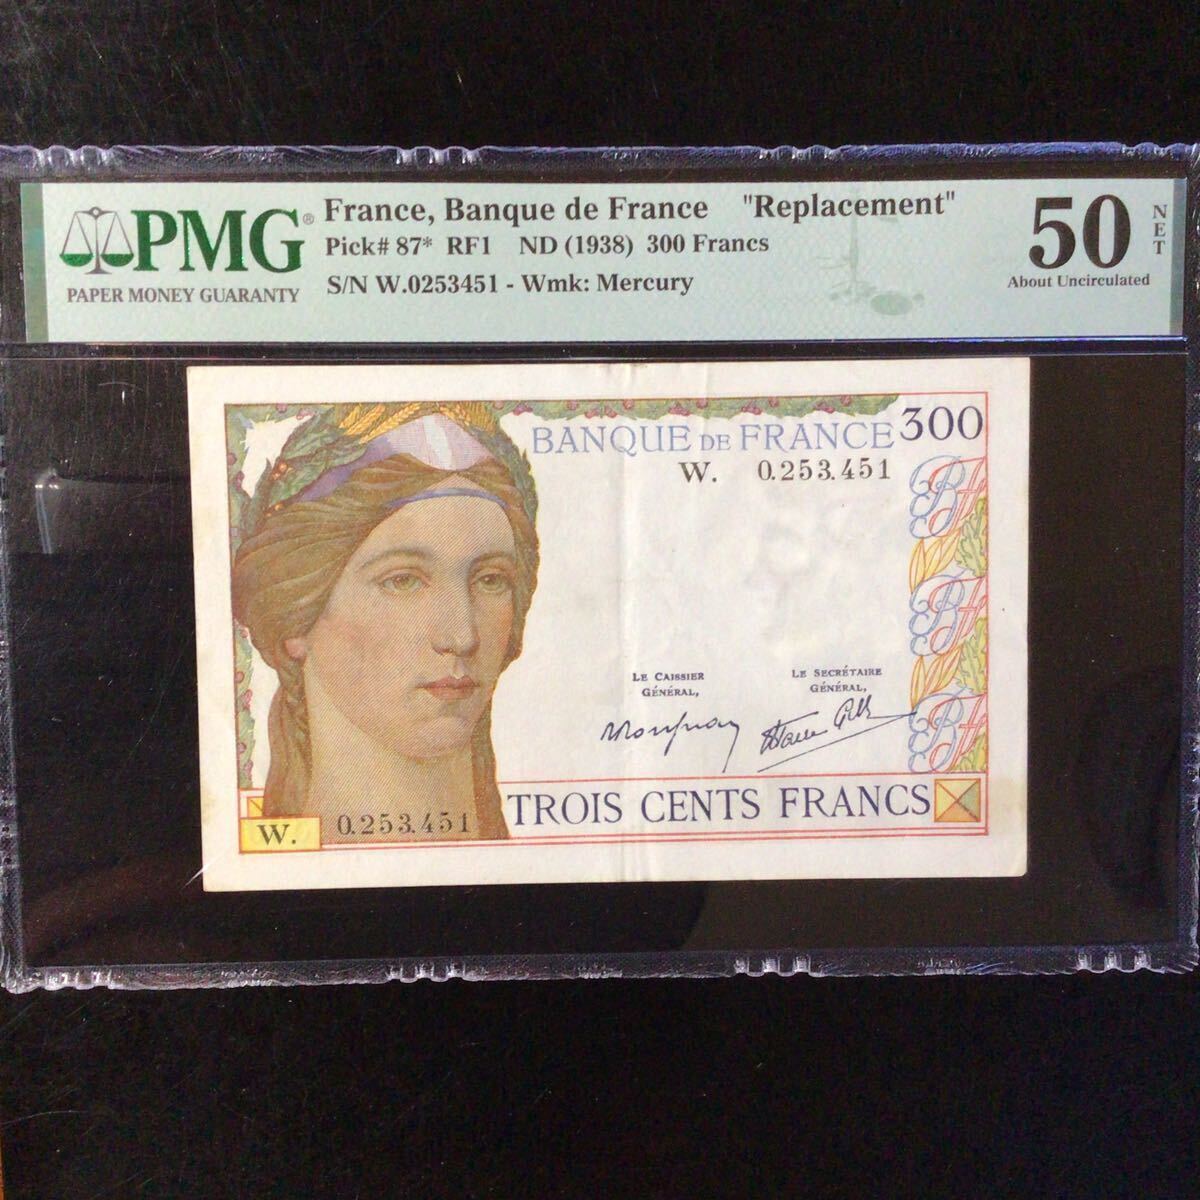 World Banknote Grading FRANCE《Banque de France》300 Francs〔Replacement〕【1938】『 PMG Grading About Uncirculated 50 NET』_画像1